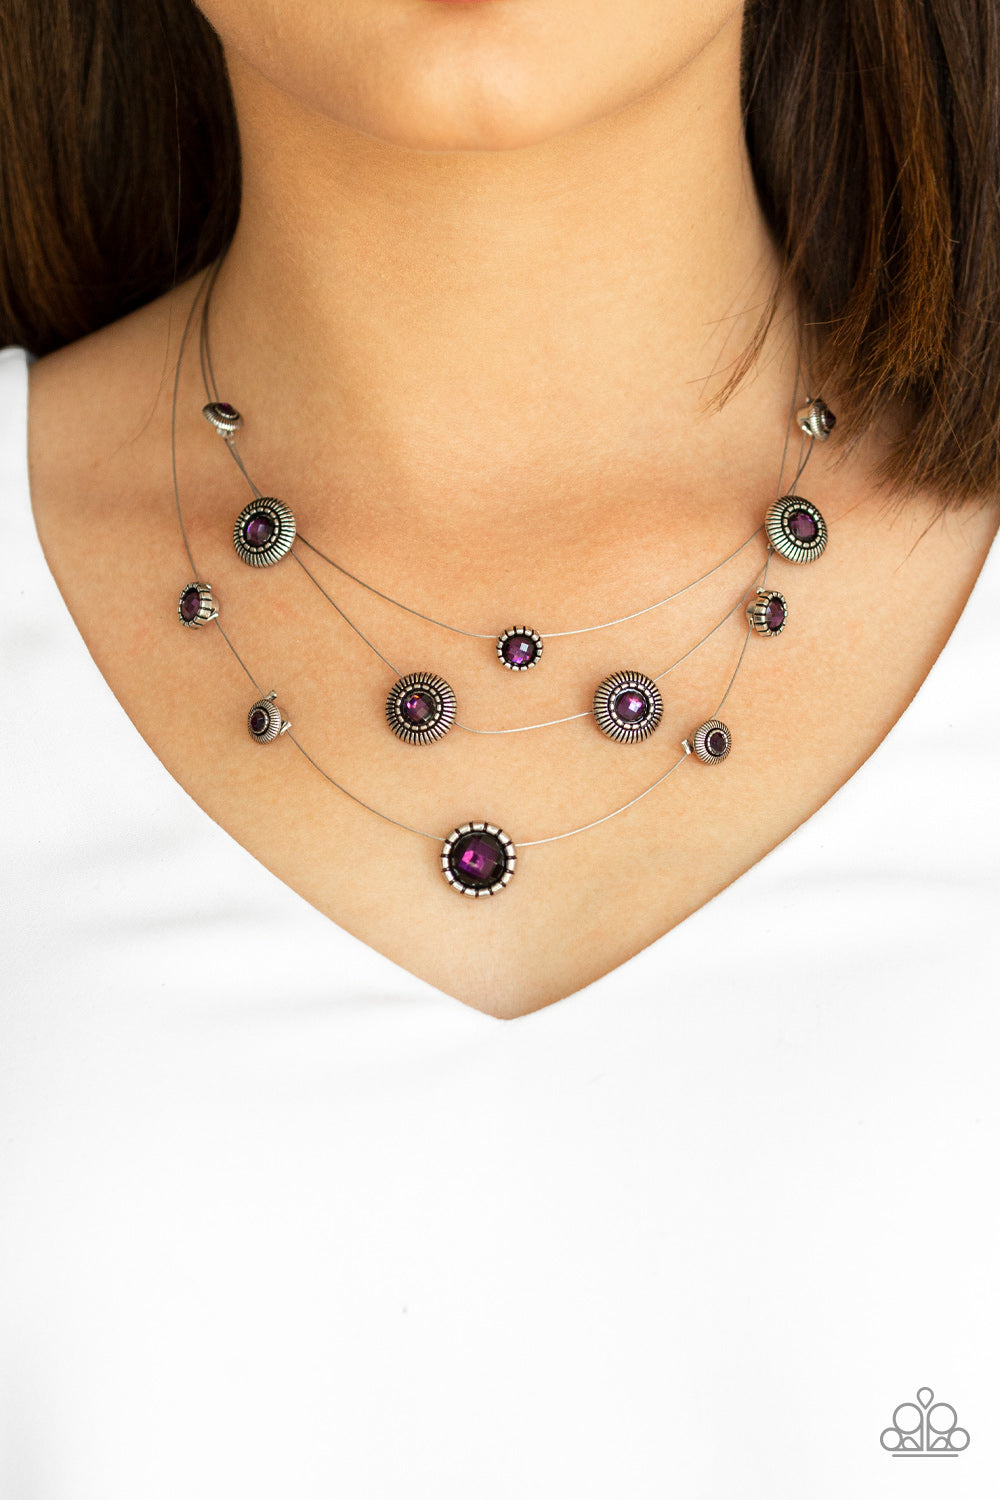 SHEER Thing! - Purple Rhinestone Wire Necklace - Paparazzi Accessories - All That Sparkles Xoxo 